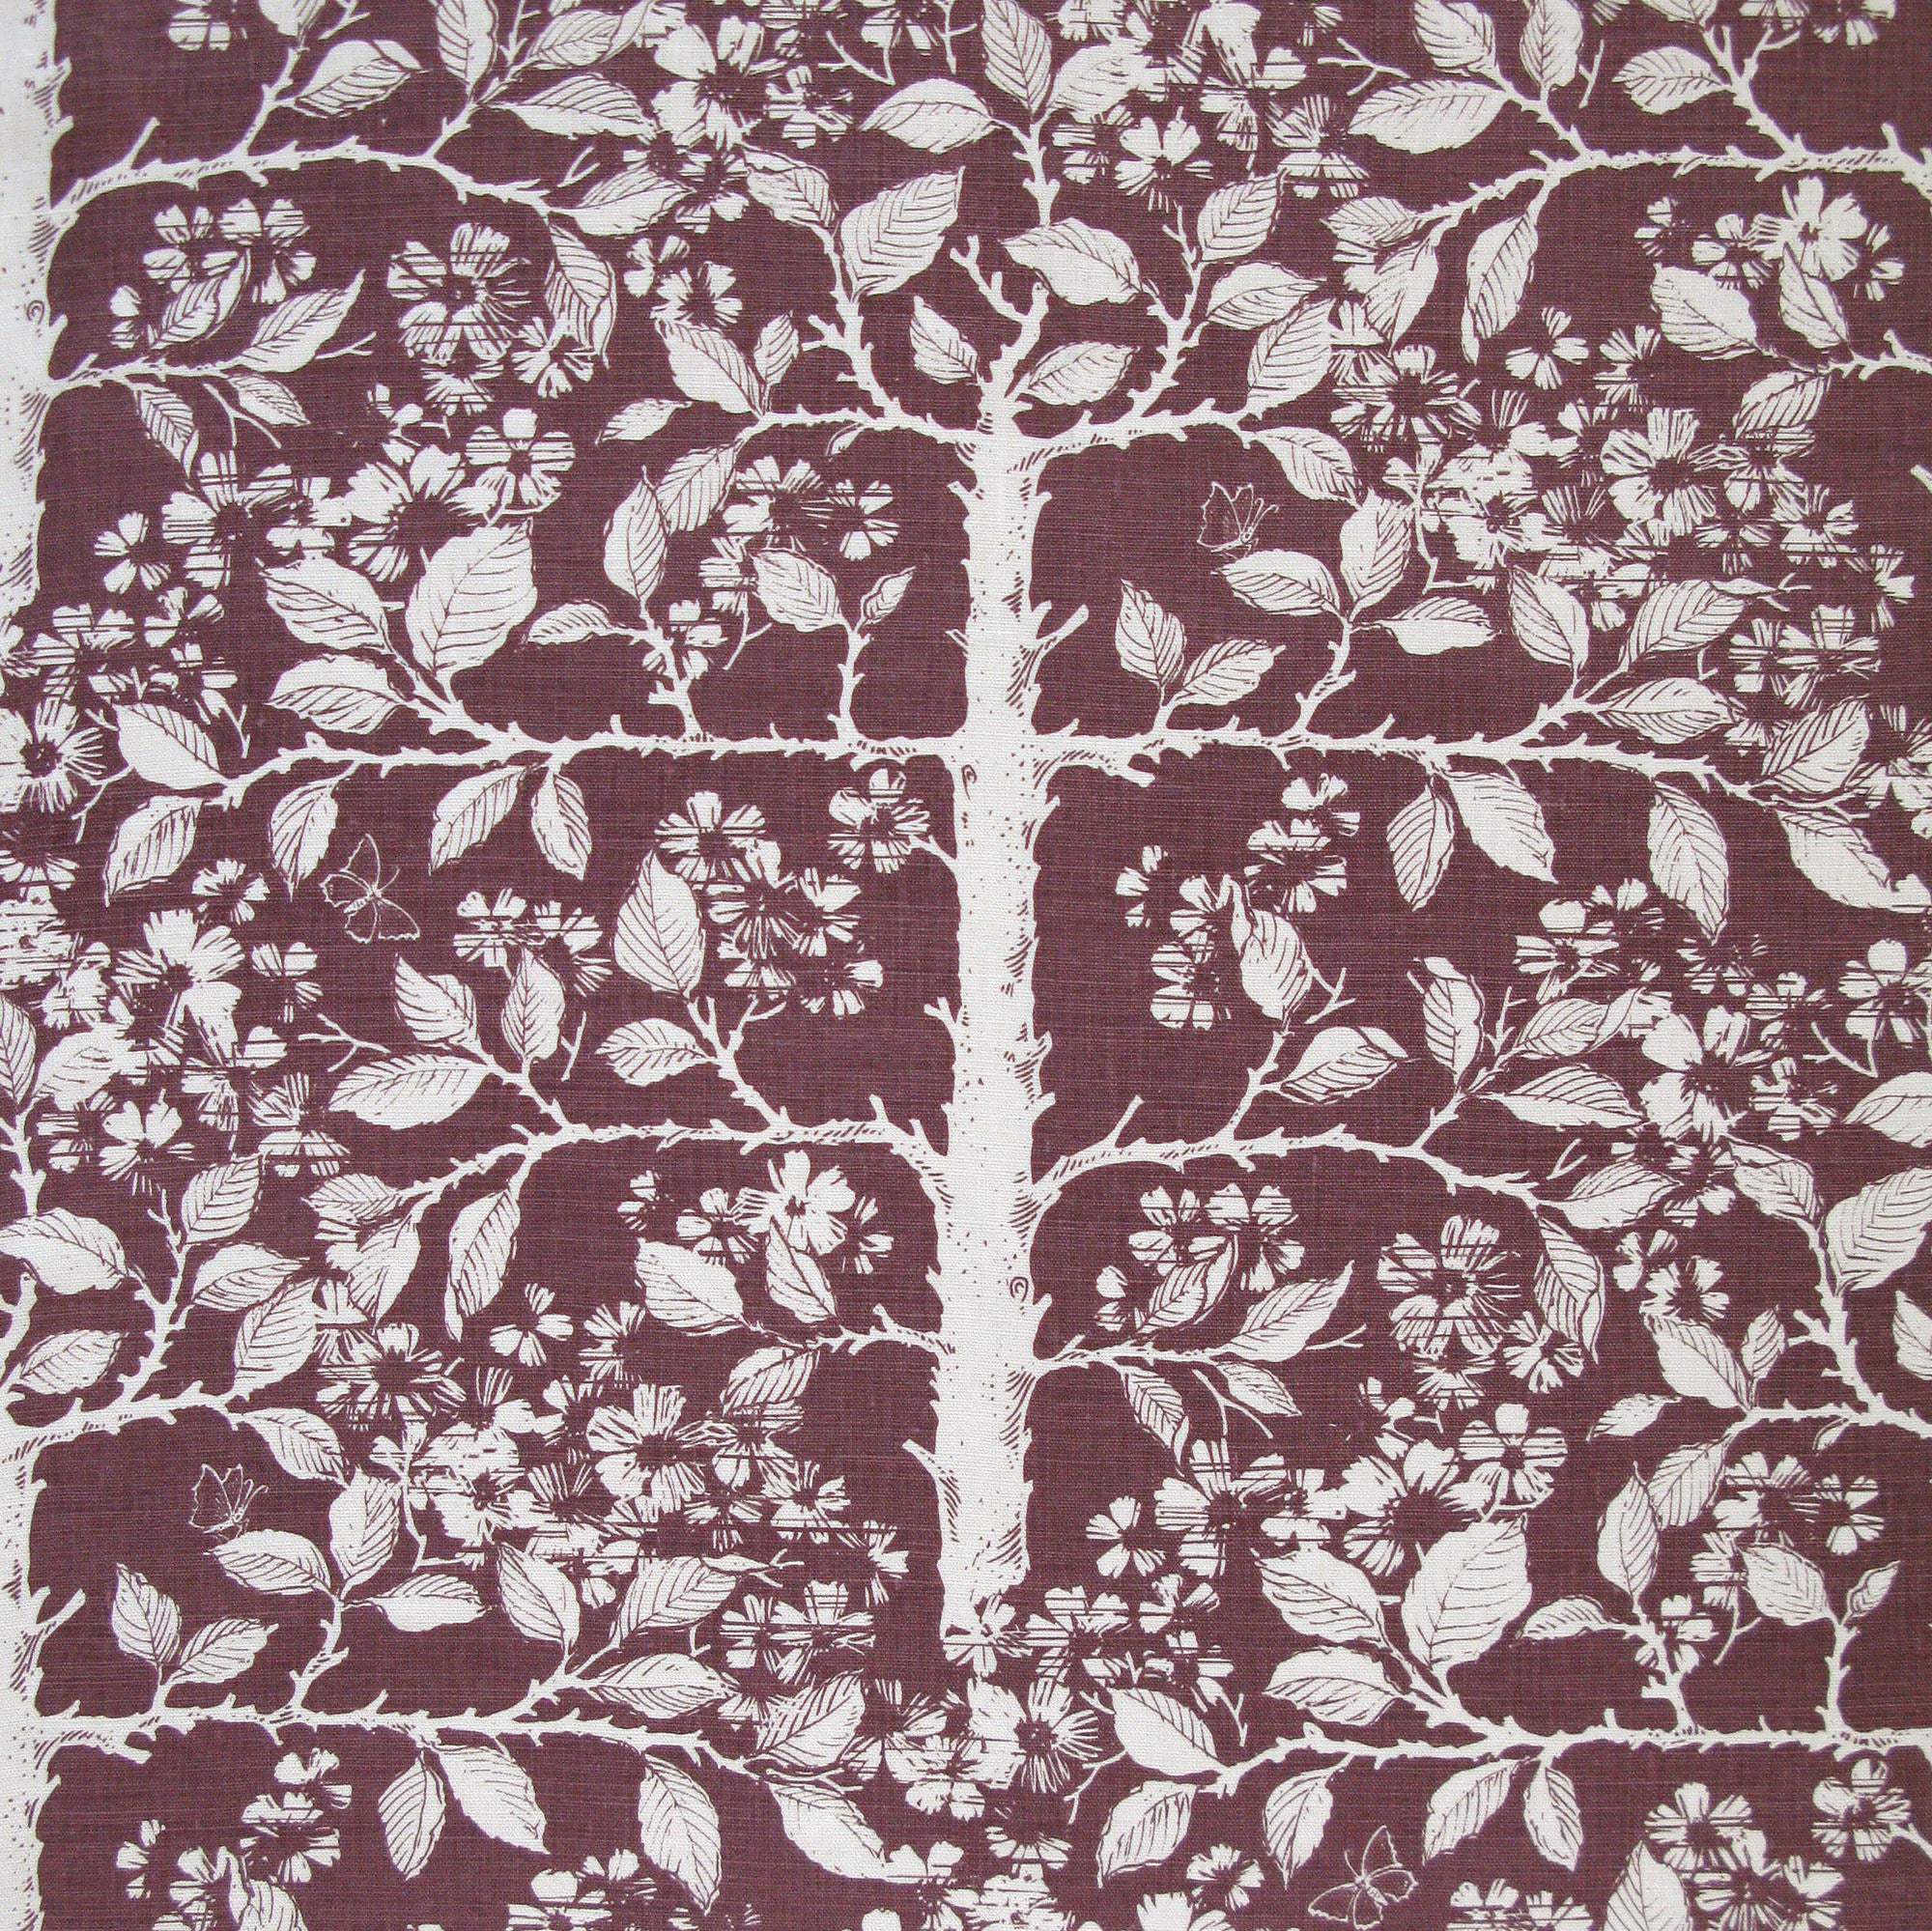 Detail of fabric in a large-scale tree and leaf print in cream on a maroon field.